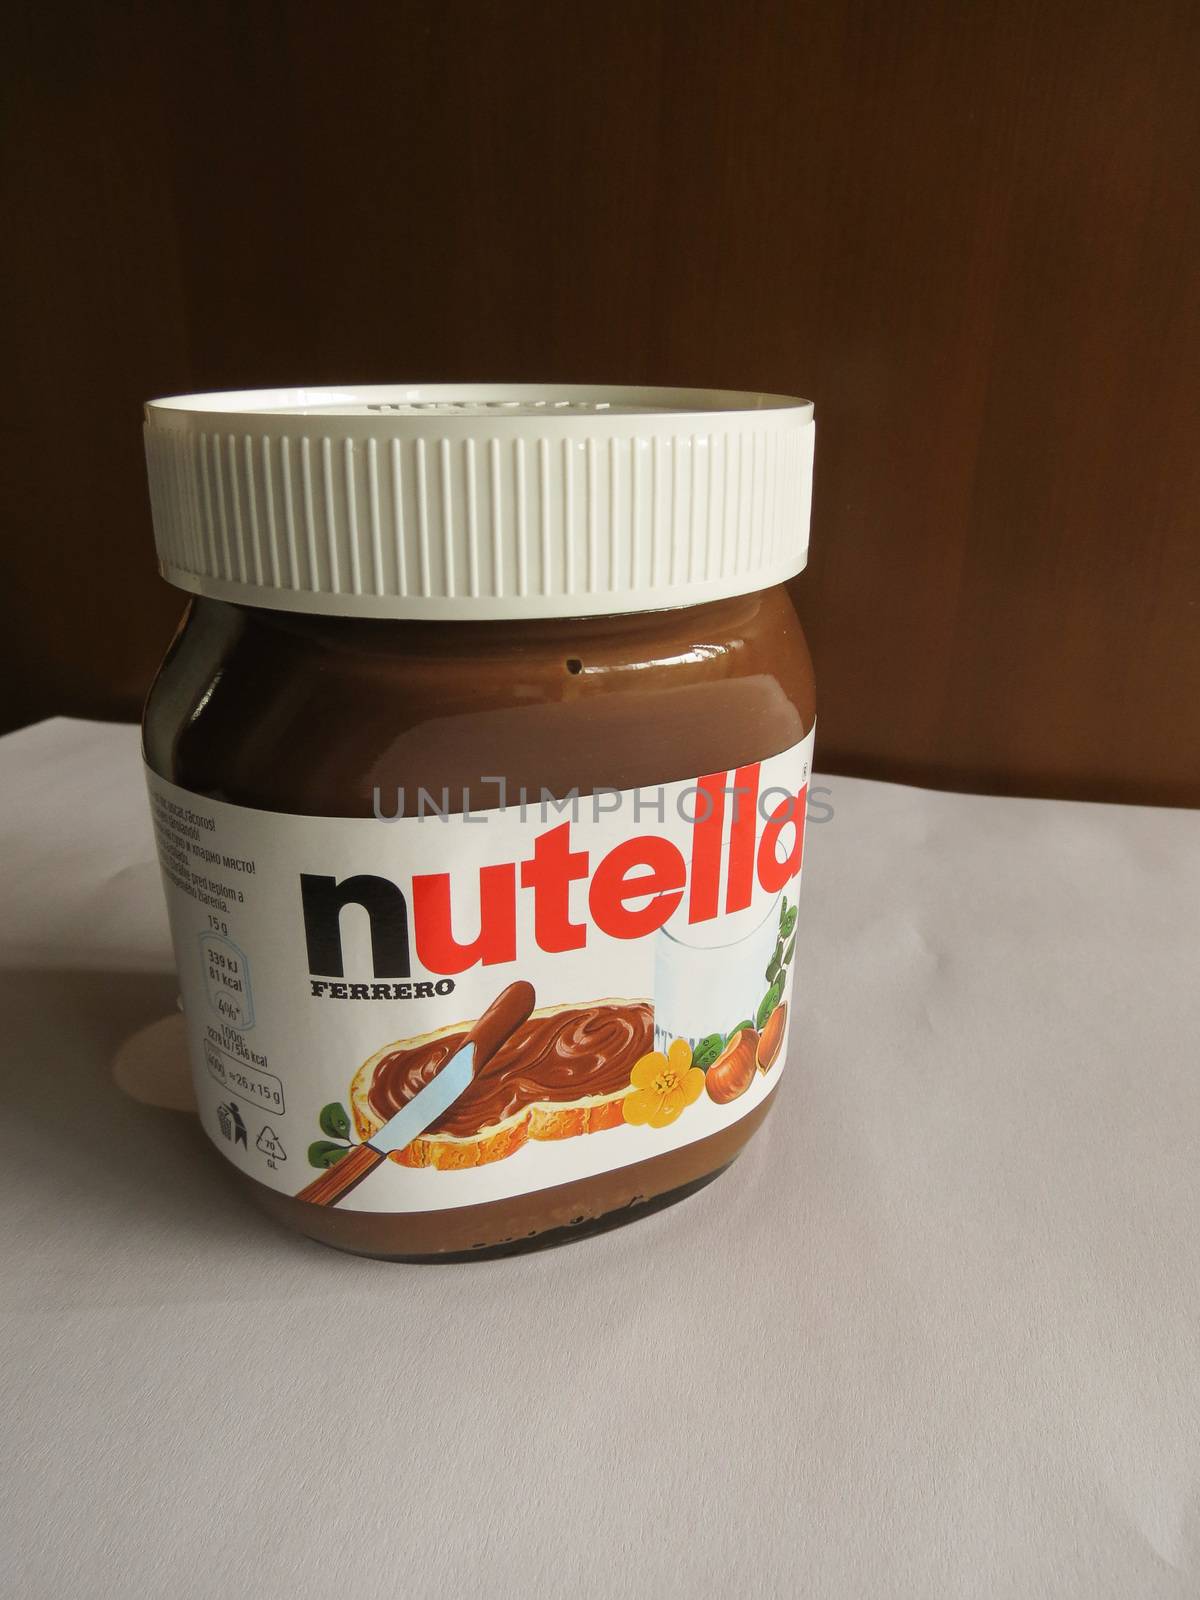 ROME, ITALY - CIRCA FEBRUARY 2015: Nutella jar Ferrero Nutella has been one of the best known Italian products worldwide for a few decades